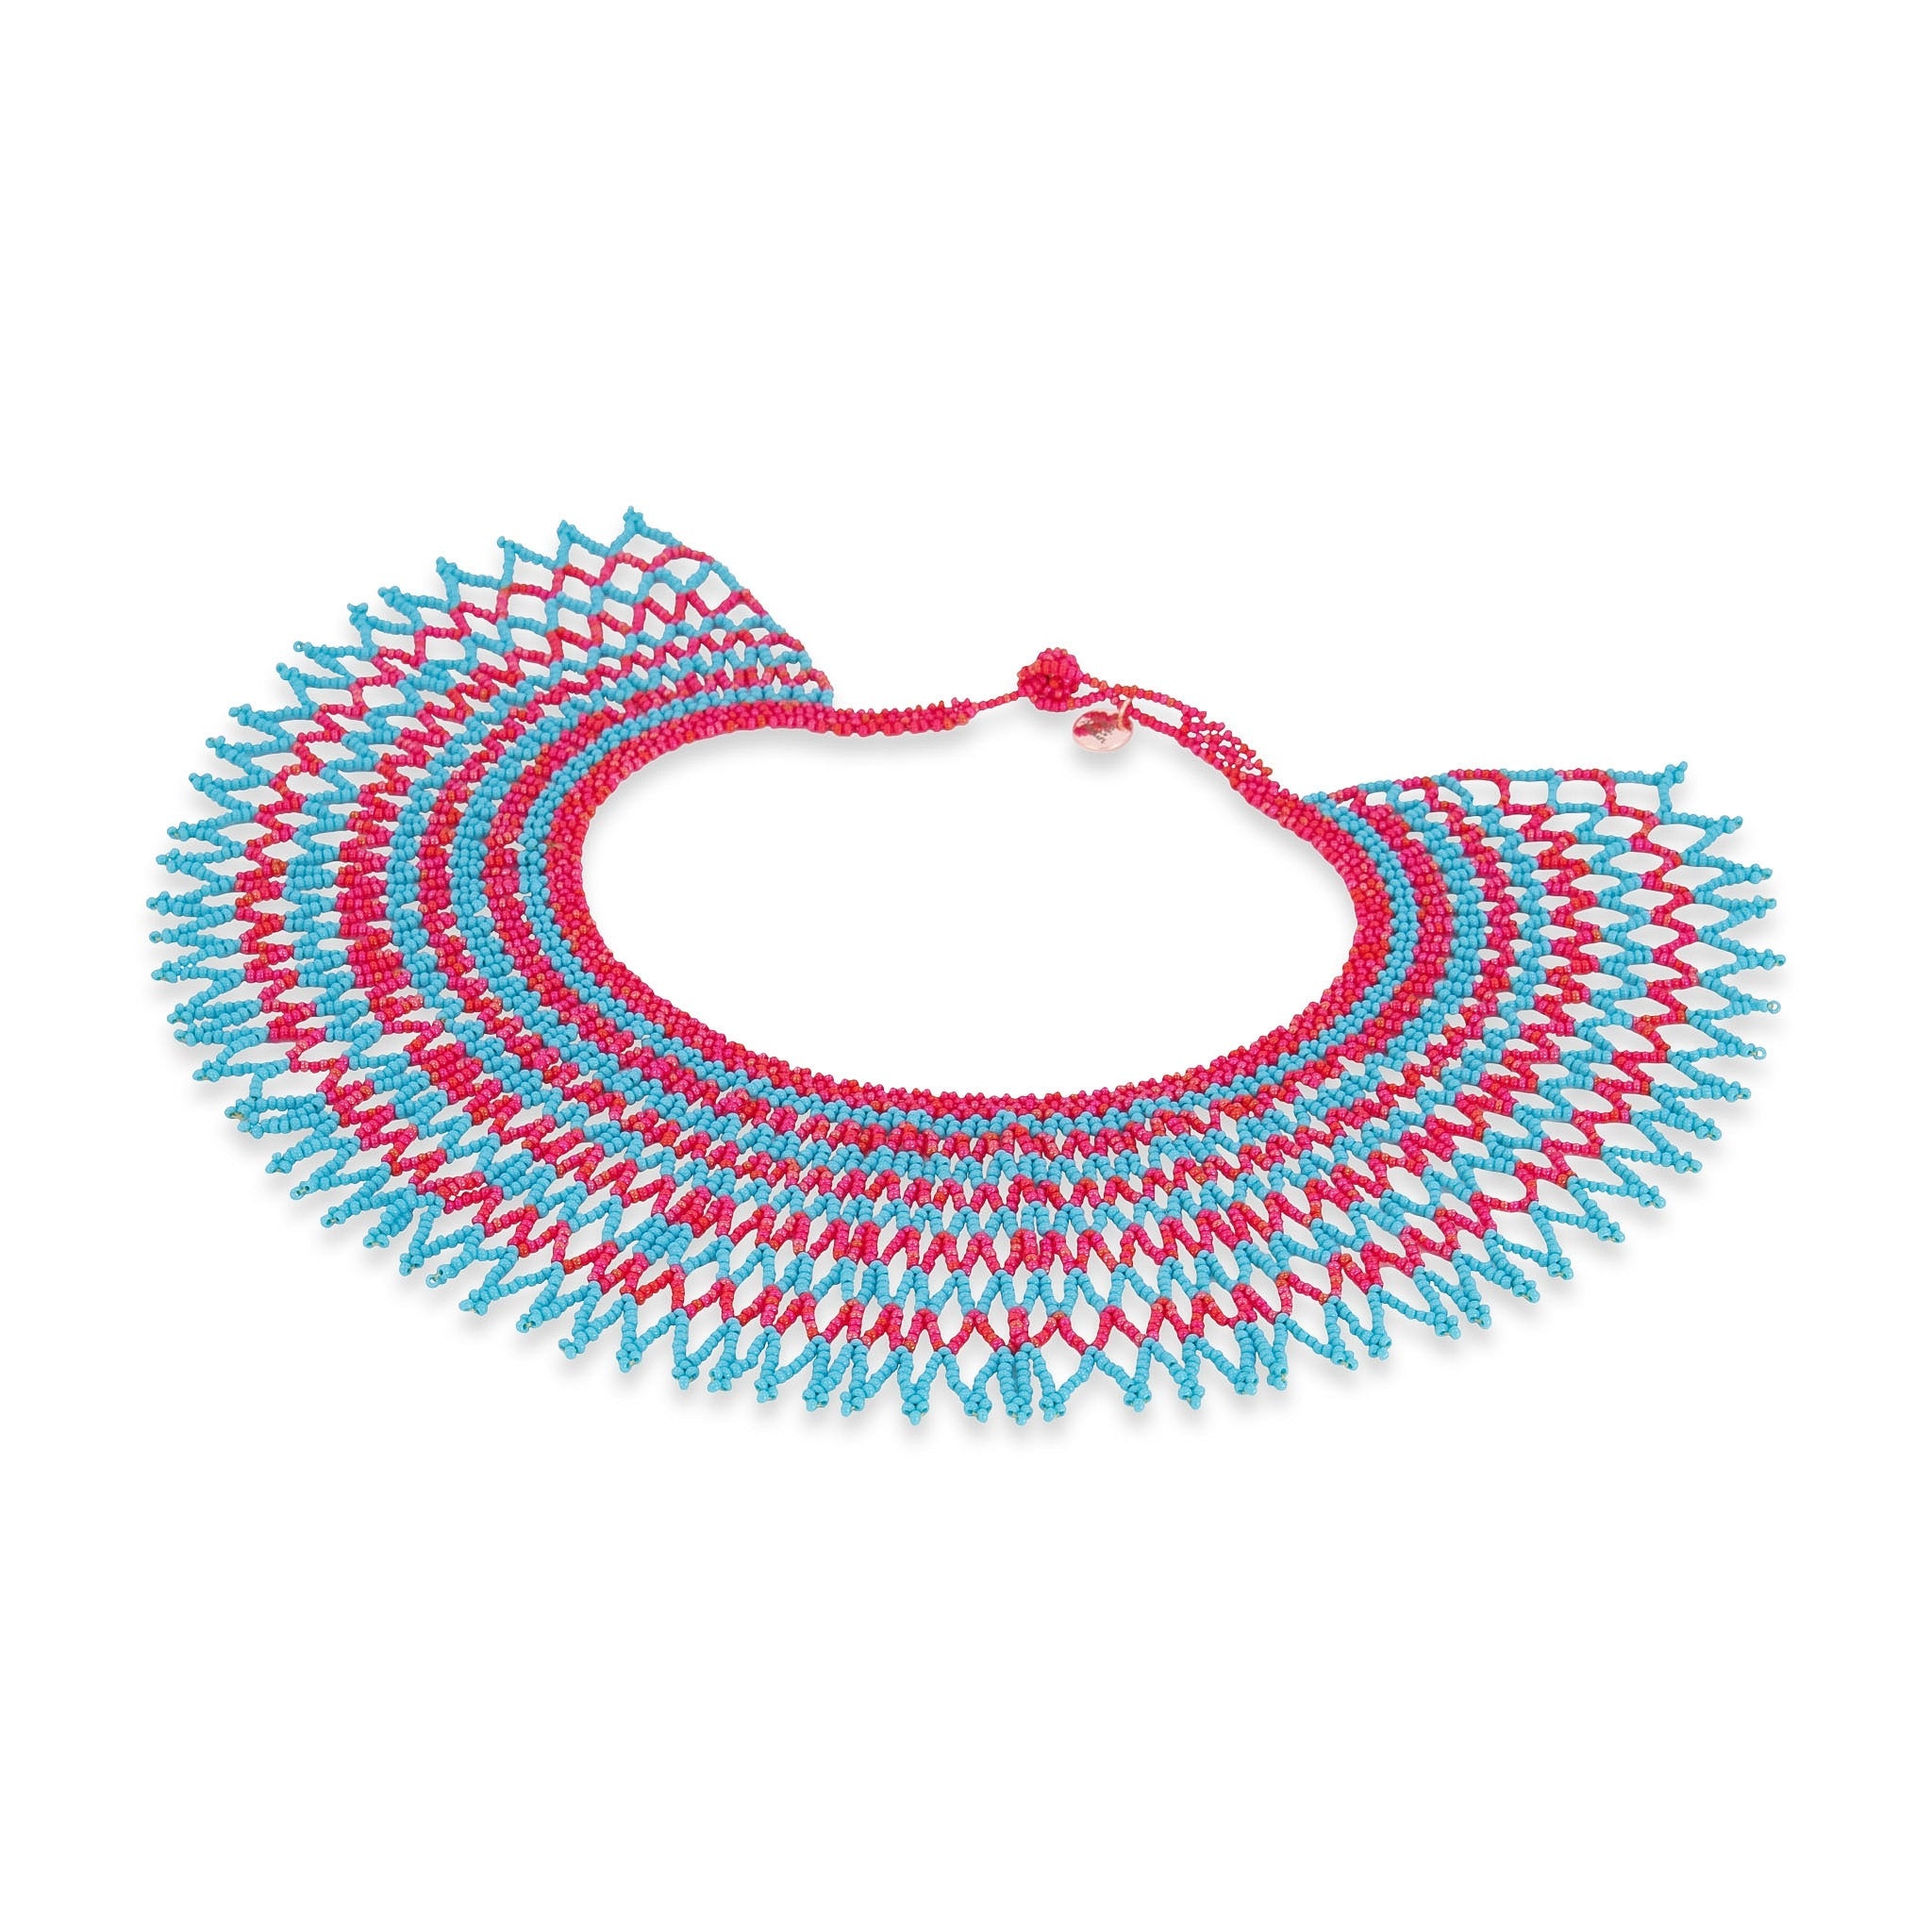 Beaded Collar Necklace - Blue/Red Stripe